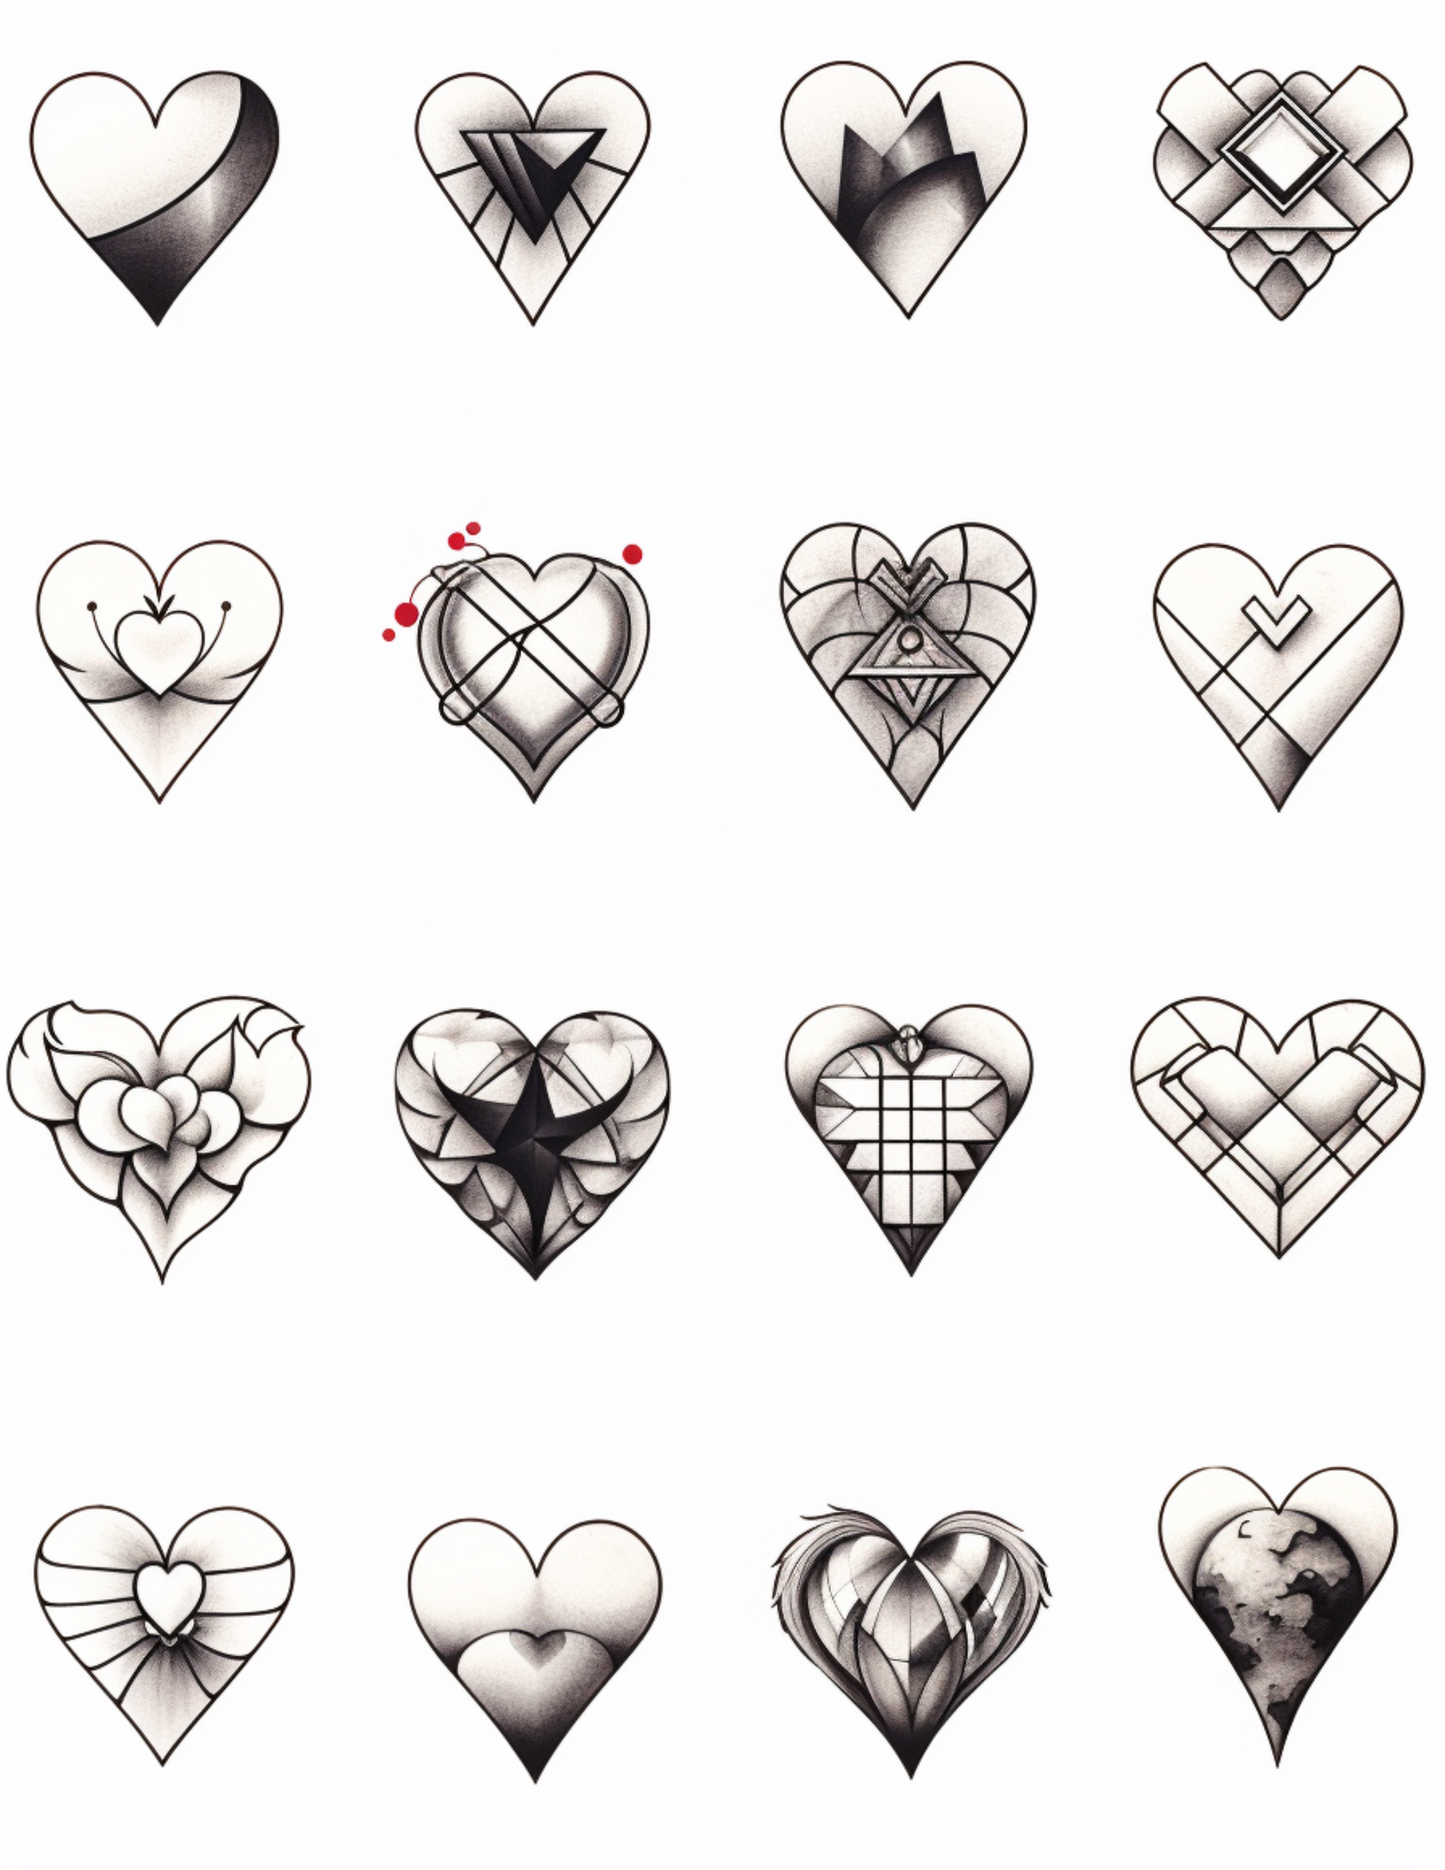 12 Heart tattoo styles |Tattoo Aesthetic | Instant download PNG